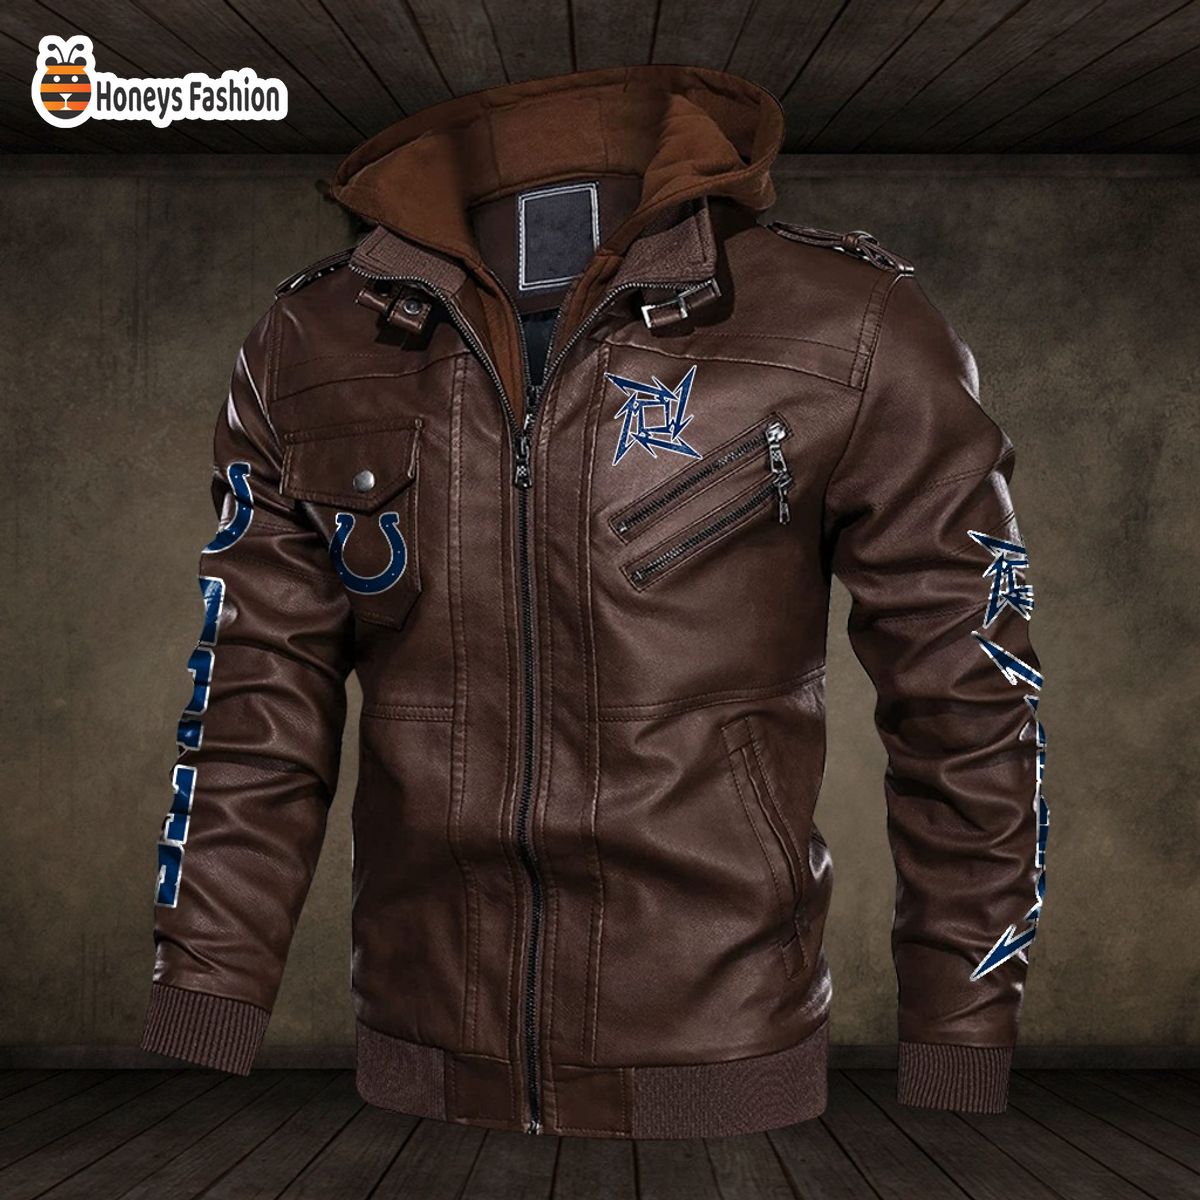 Indianapolis Colts NFL Metallica 2D PU Leather Jacket